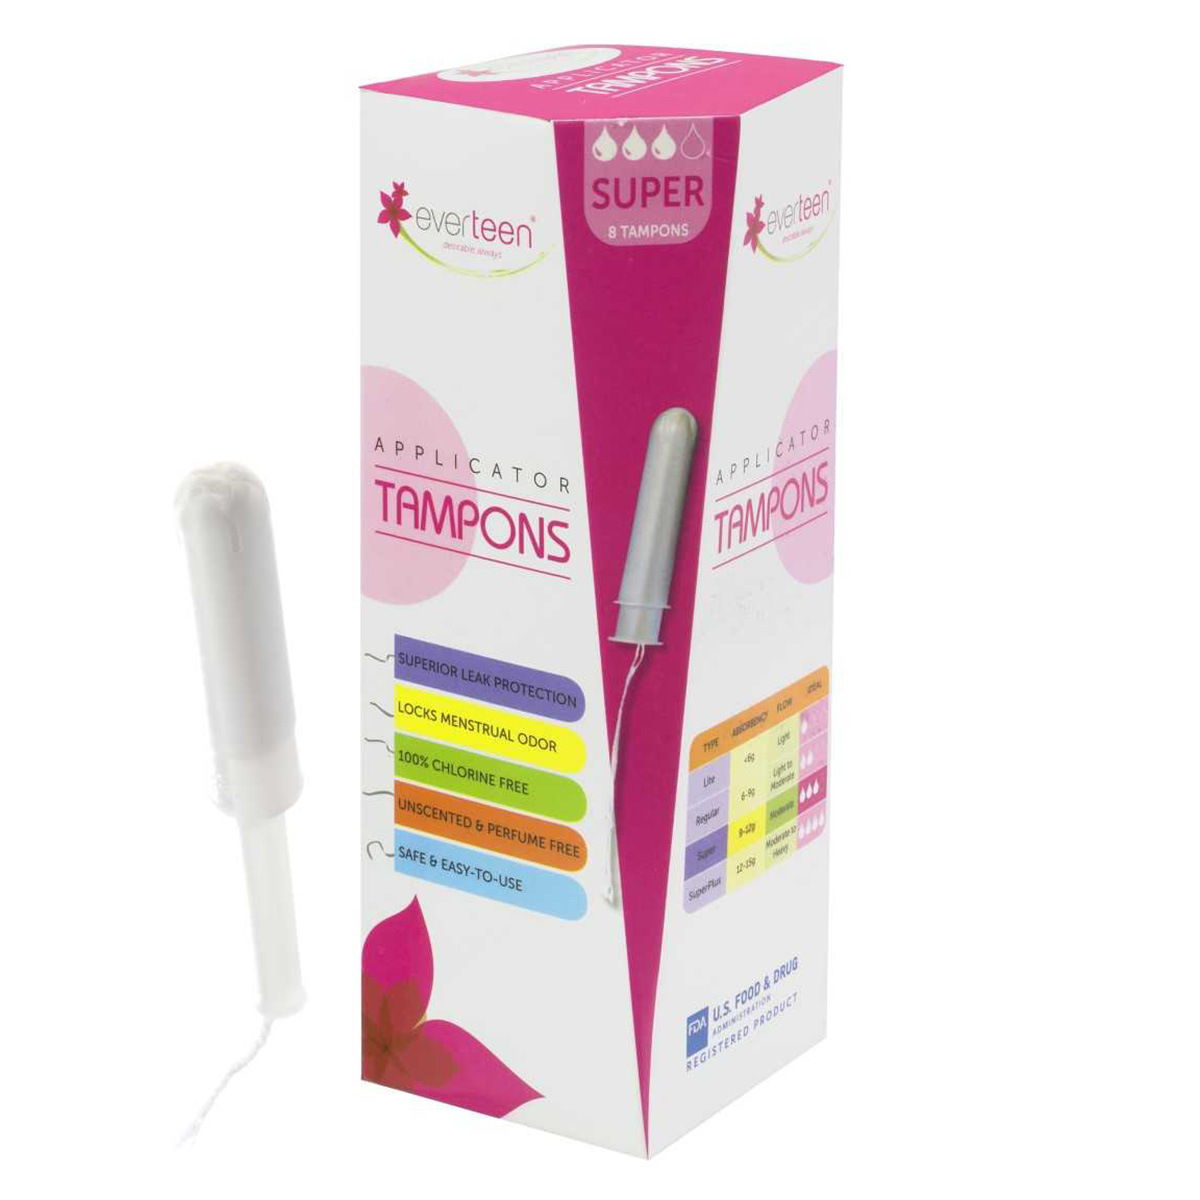 everteen Super Applicator Tampons For Periods In Women - Pack of 1, 8 Tampons